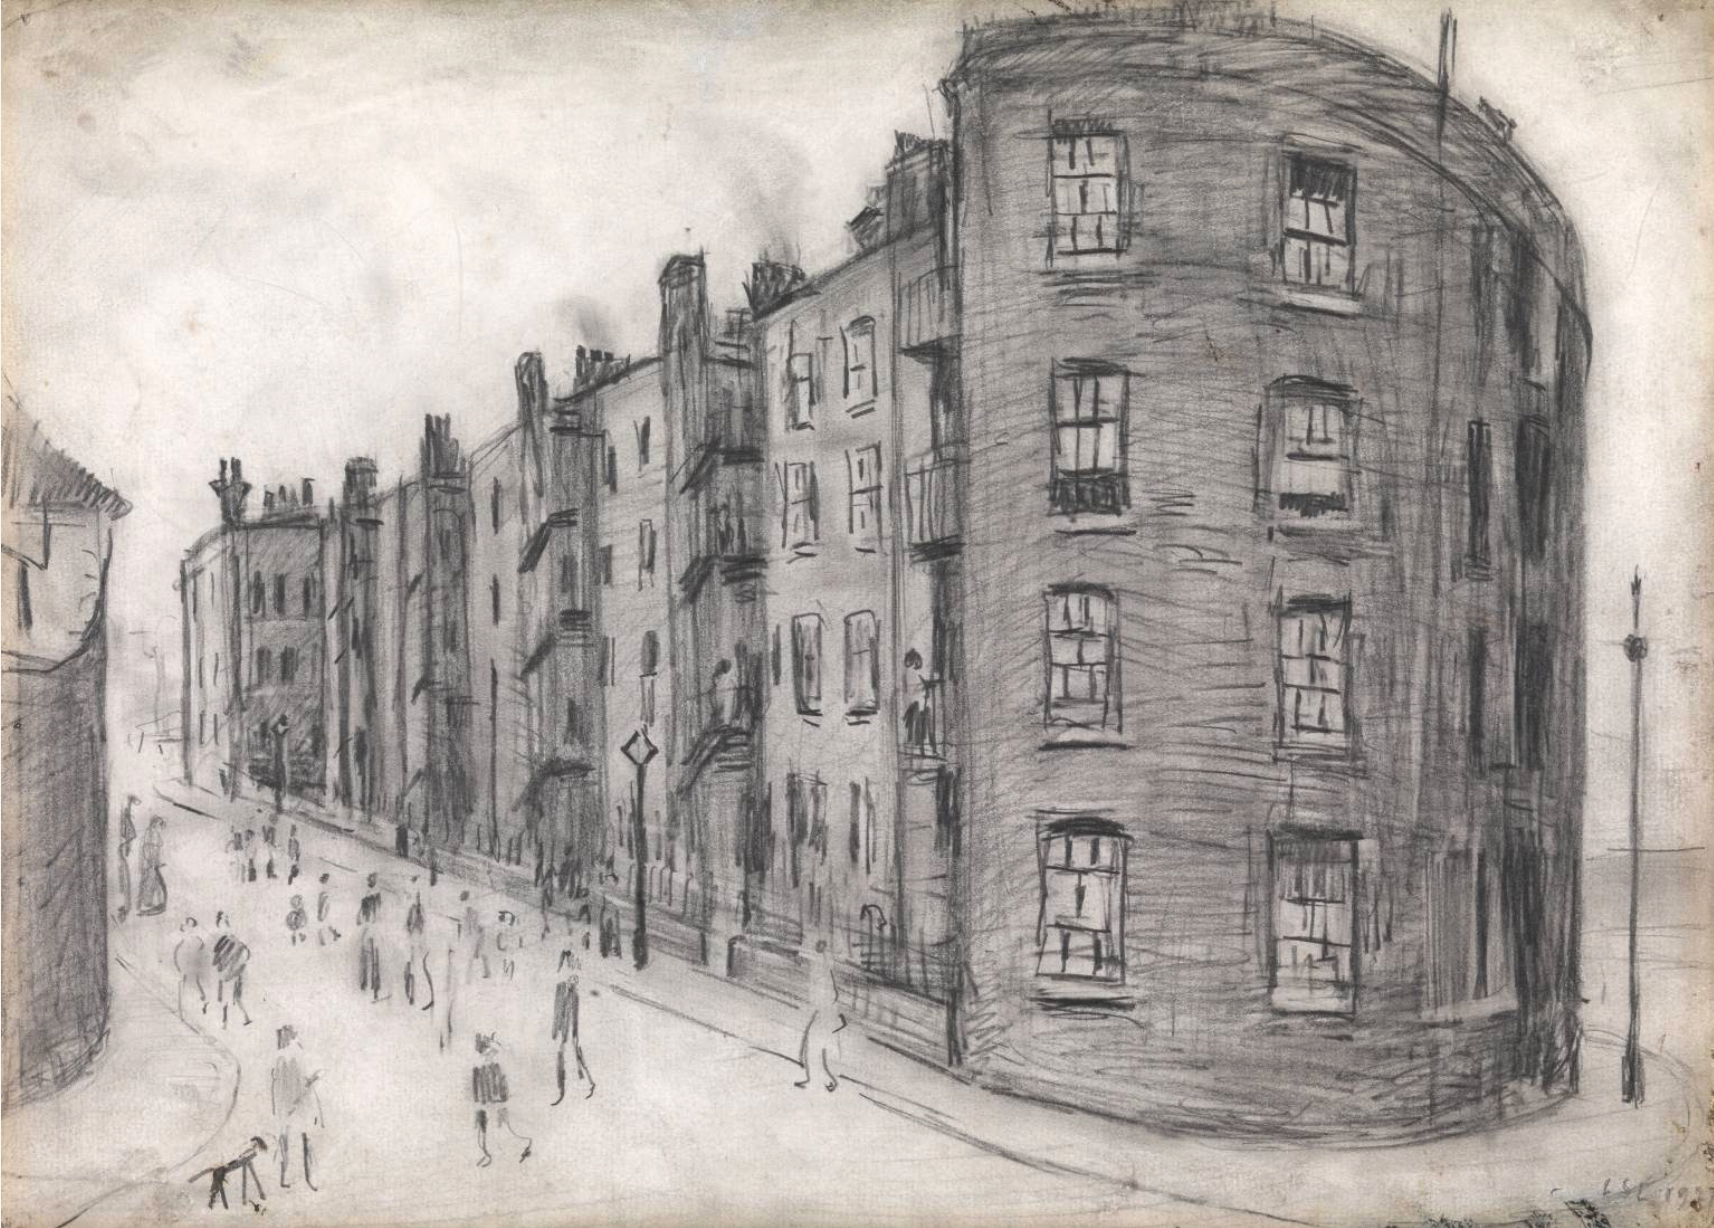 Study for ‘Dwellings, Ordsall Lane, Salford’ (1951) by Laurence Stephen Lowry (1887 - 1976), English artist.